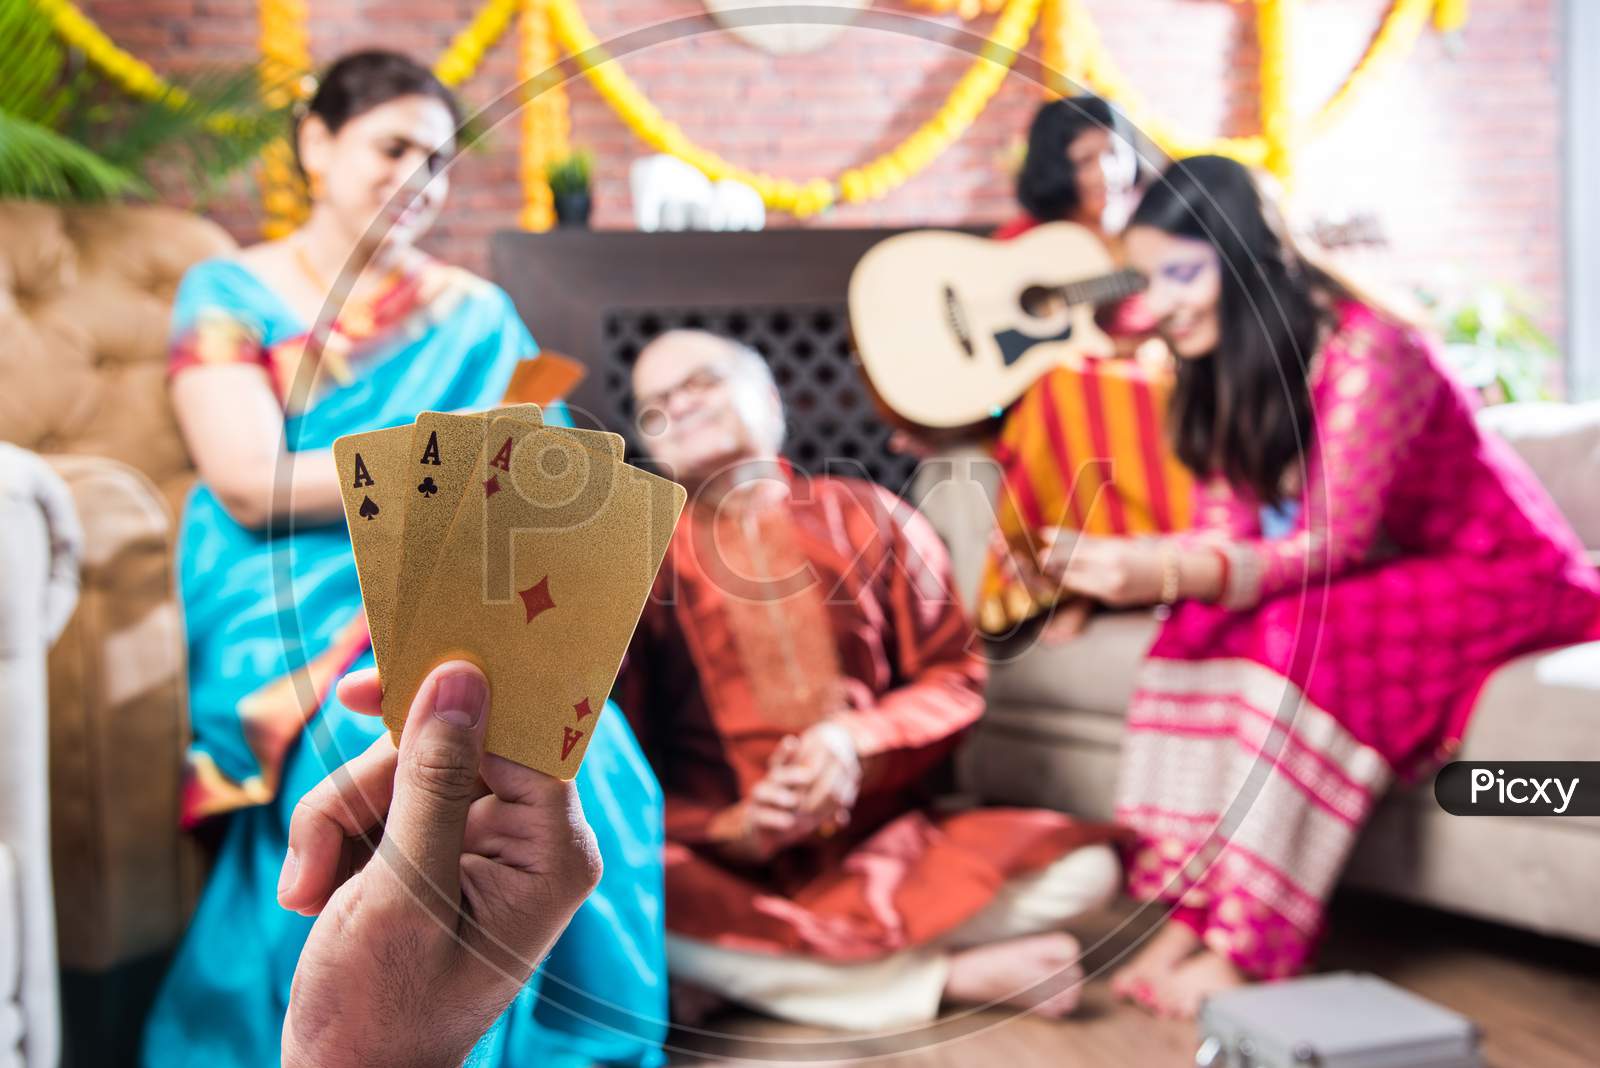 Indian Family Playing Three Cards Or Teen Patti In Diwali Or Deepavali Festival At Home